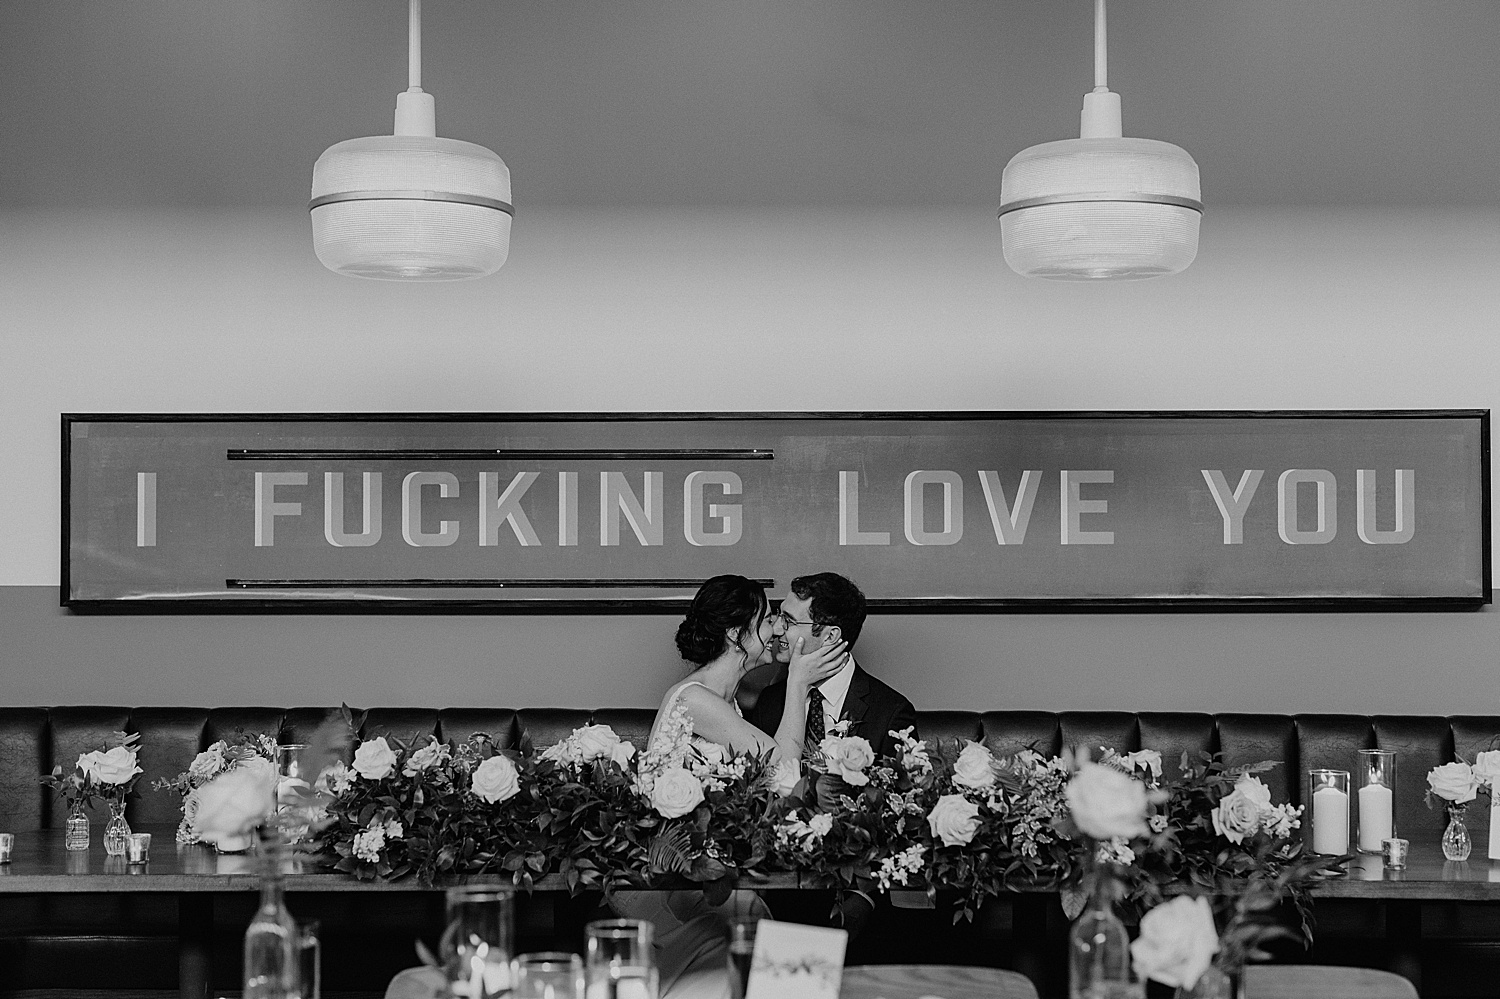 Couple under sign that says "I fucking love you"